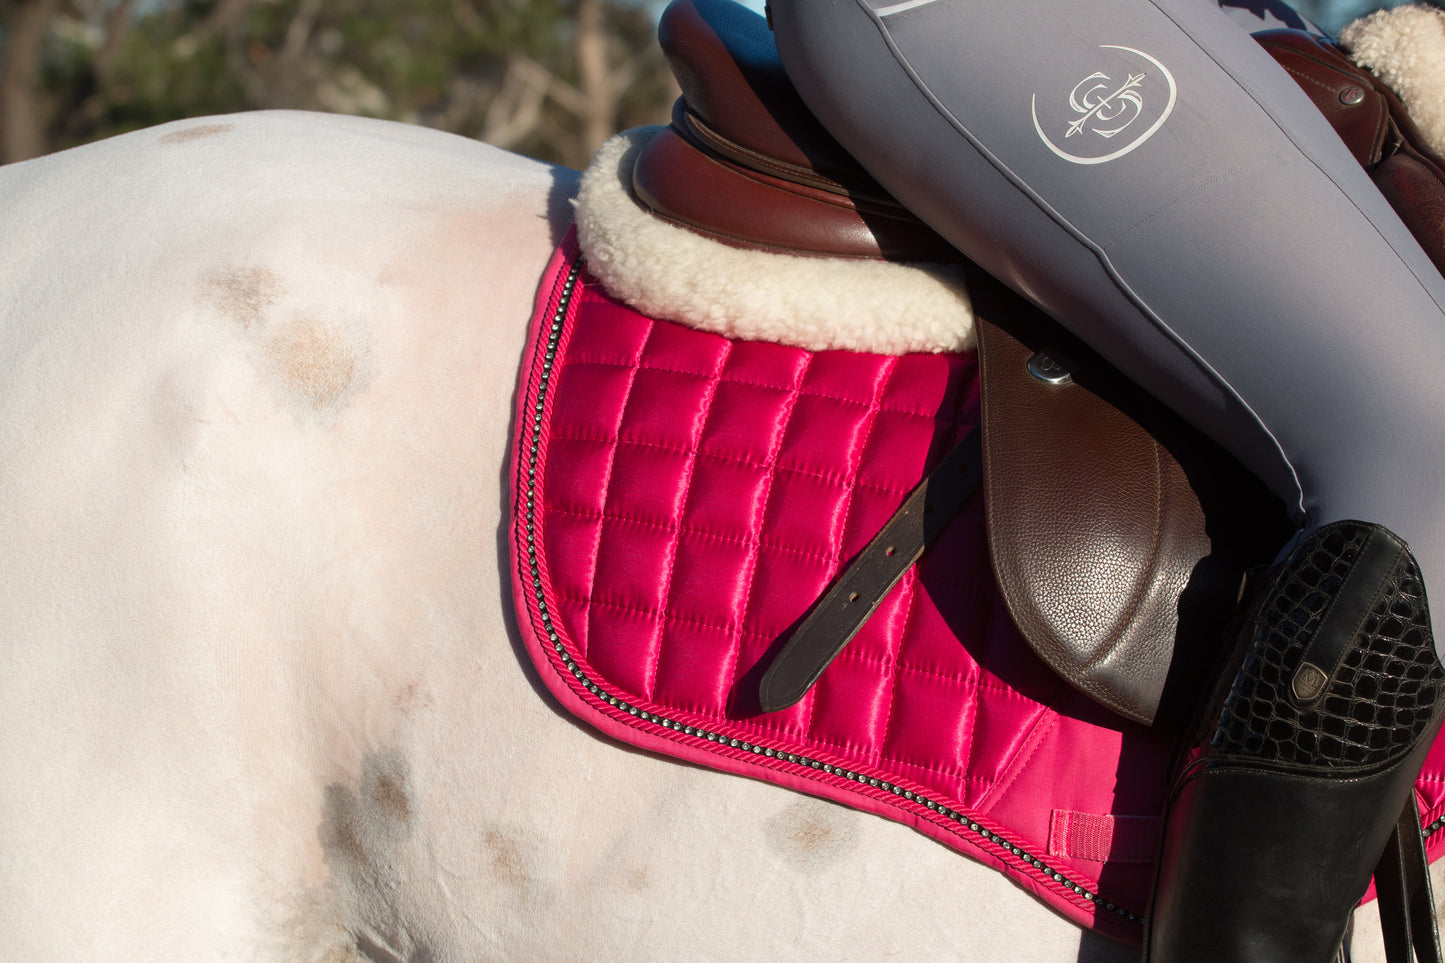 Stereotypical Barbie Deluxe Crystal Satin Saddle Pad